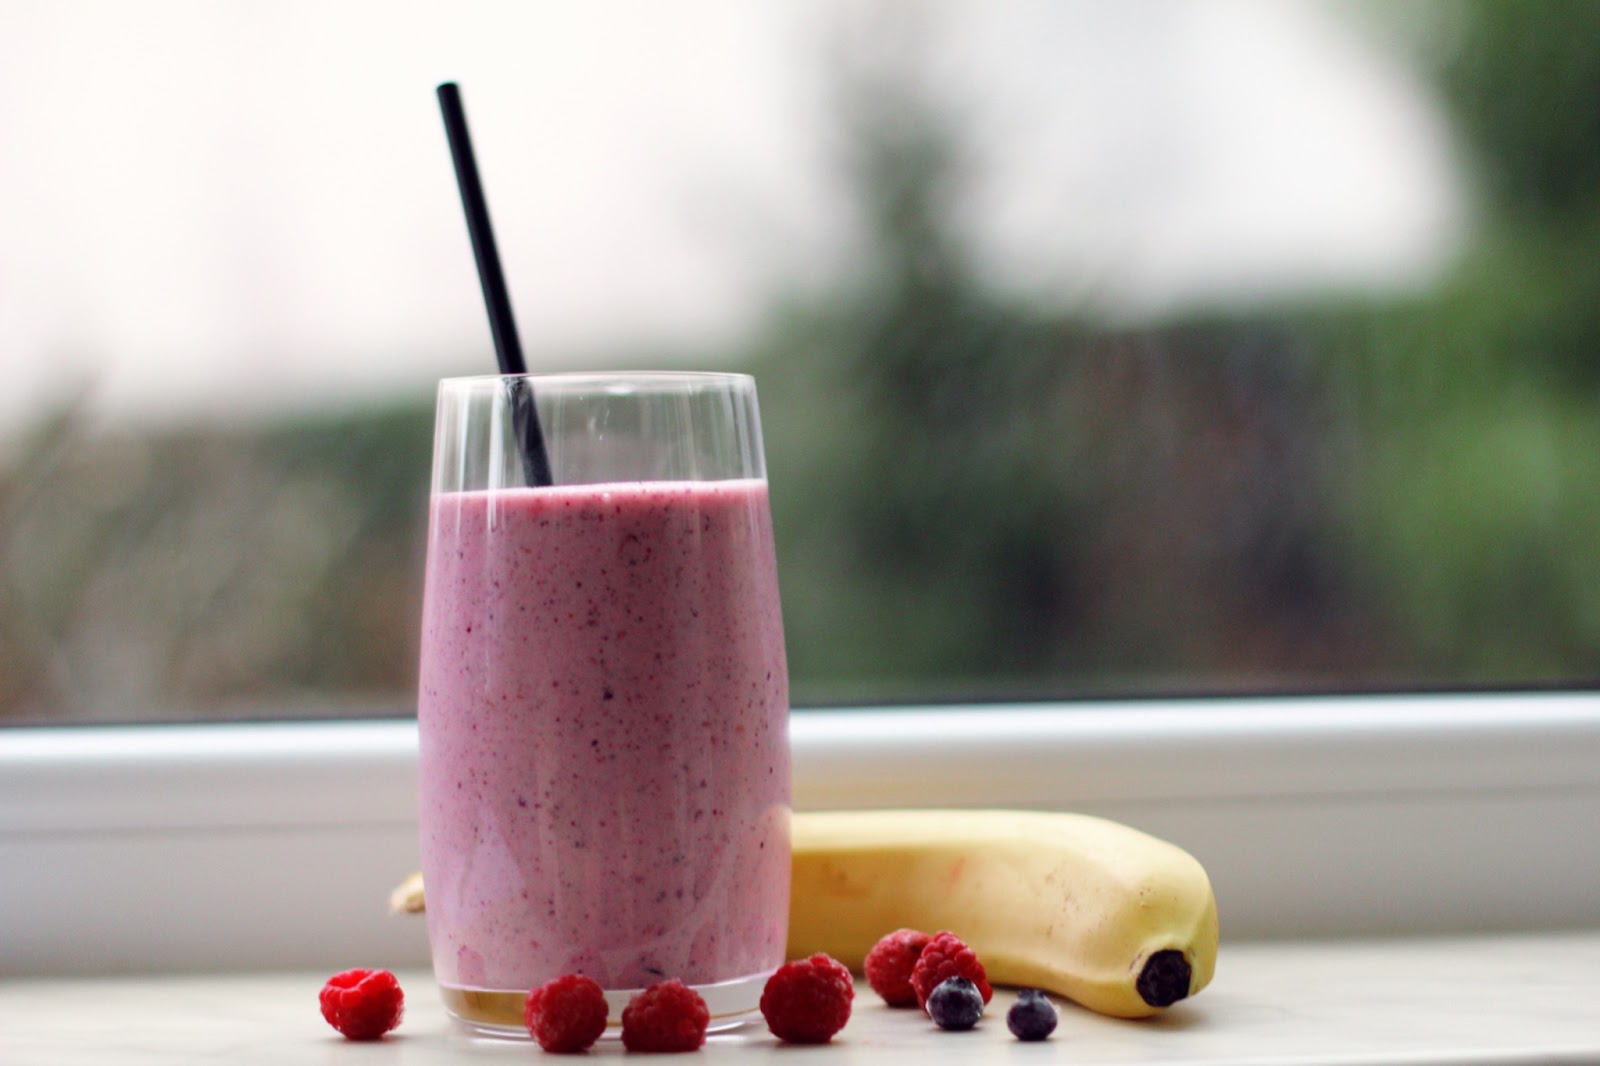 A pink fruit smoothie is pictured in a glass with a straw, on a counter next to raspberries, blueberries, and a banana